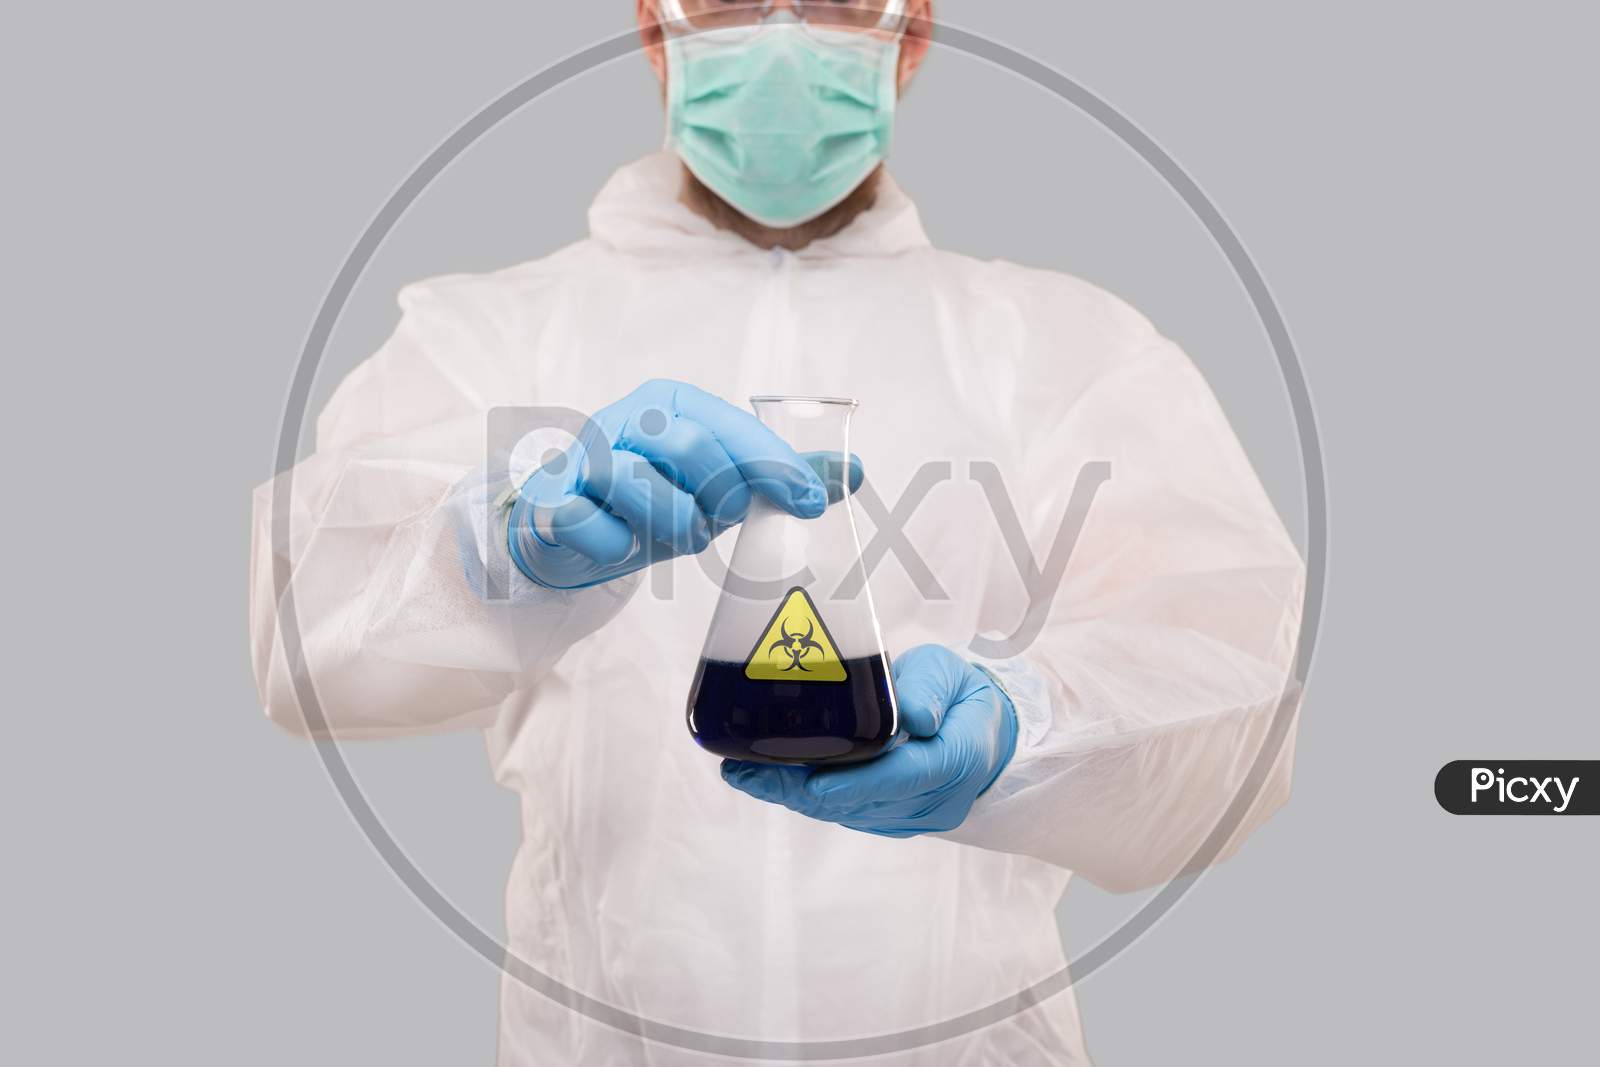 Male Laboratory Worker In Chemical Suit, Wearing Medical Mask And Glasses Showing Flask With Blue Liquid Biohazard Sign. Science, Medical, Virus Concept